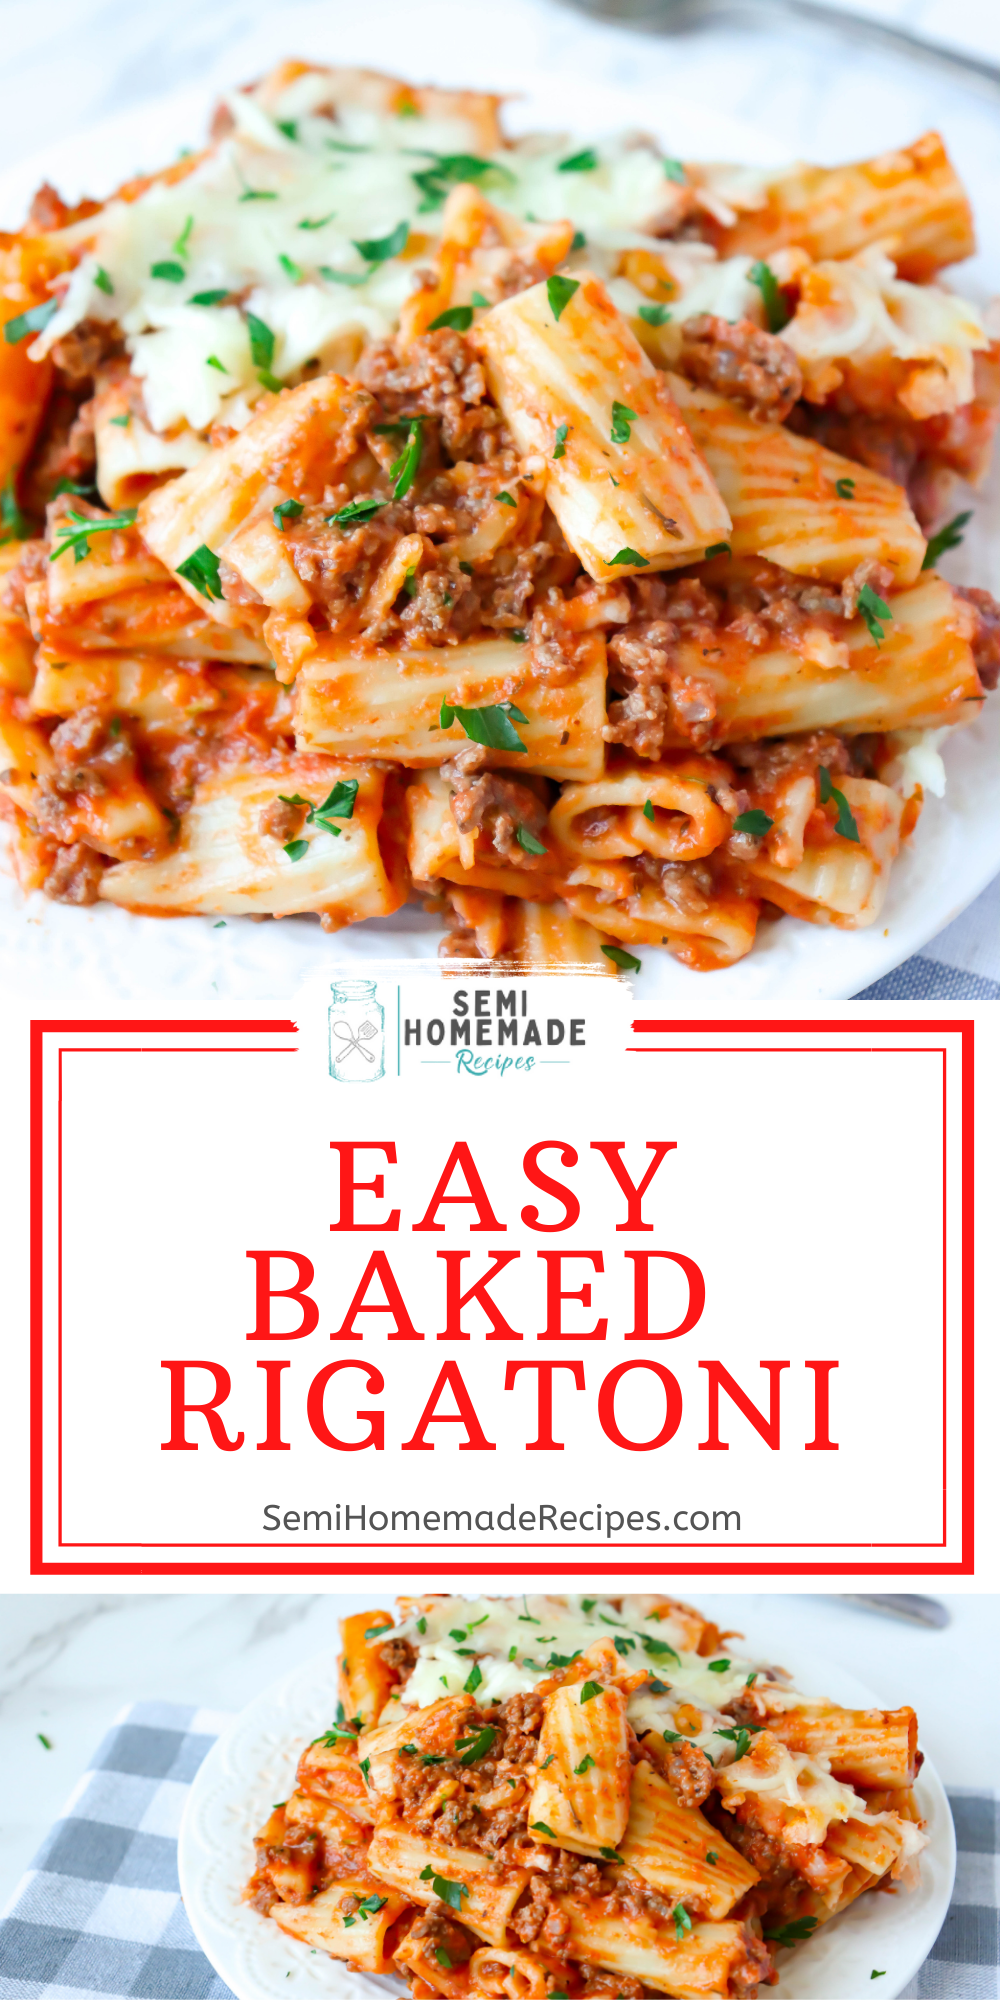 Baked Rigatoni is a rigatoni baked pasta casserole that is mixed with a wonderful meat sauce and topped with shredded mozzarella cheese.